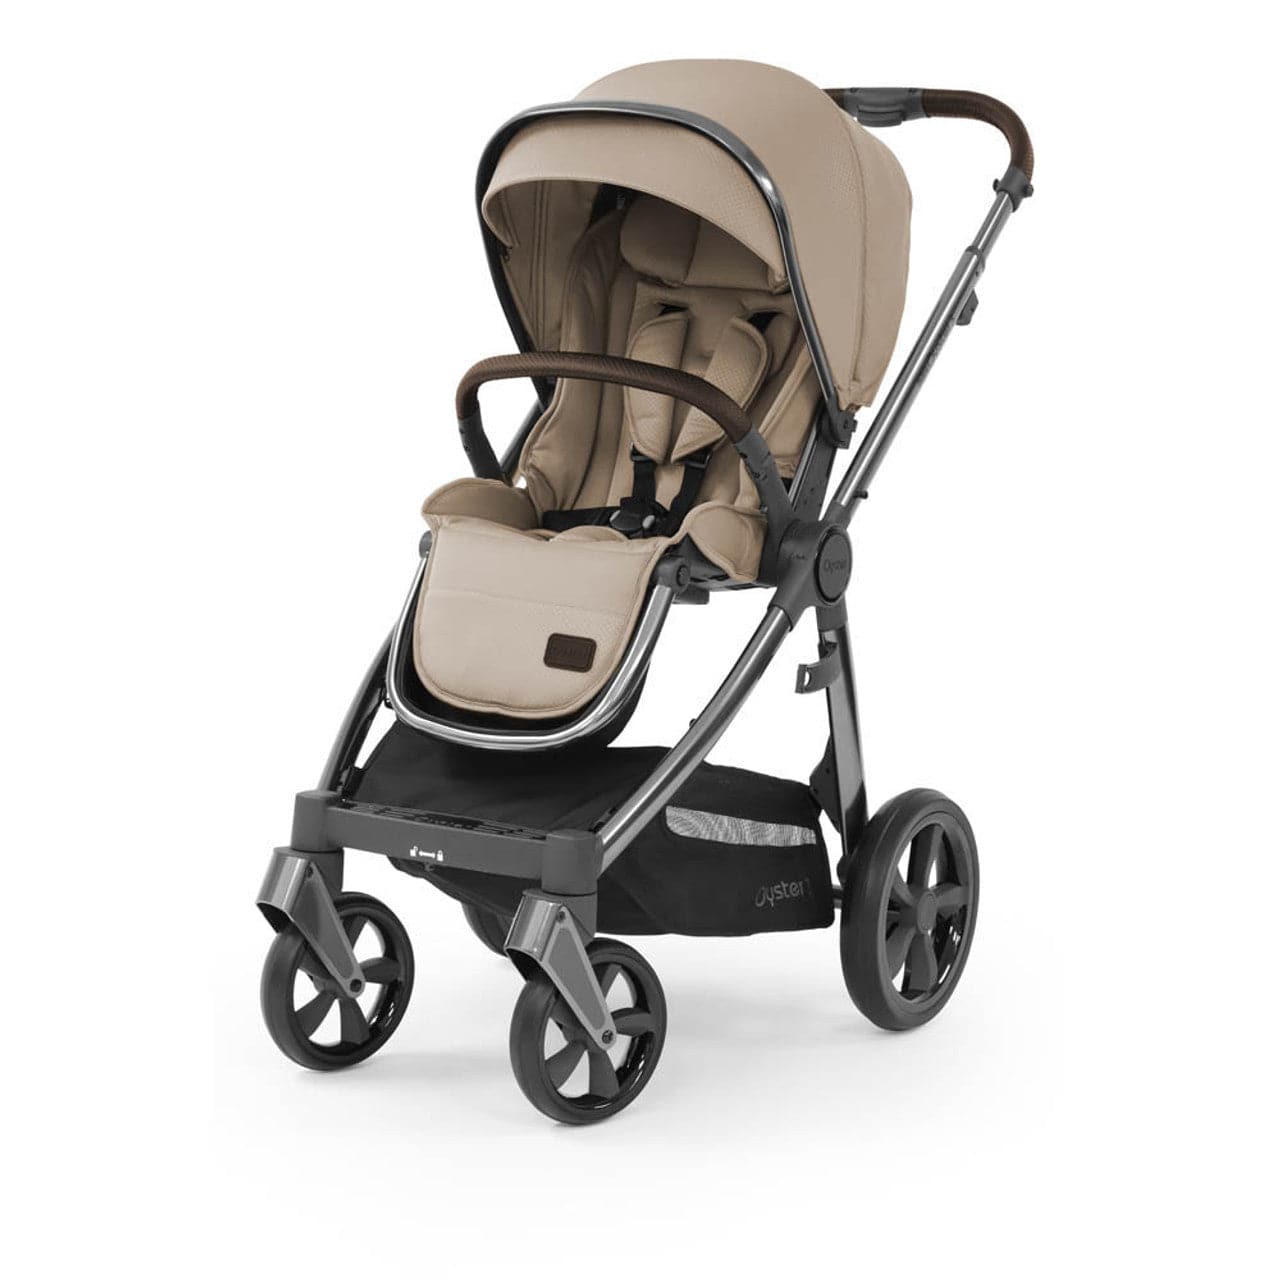 Babystyle Oyster 3 Pushchair - Butterscotch - For Your Little One